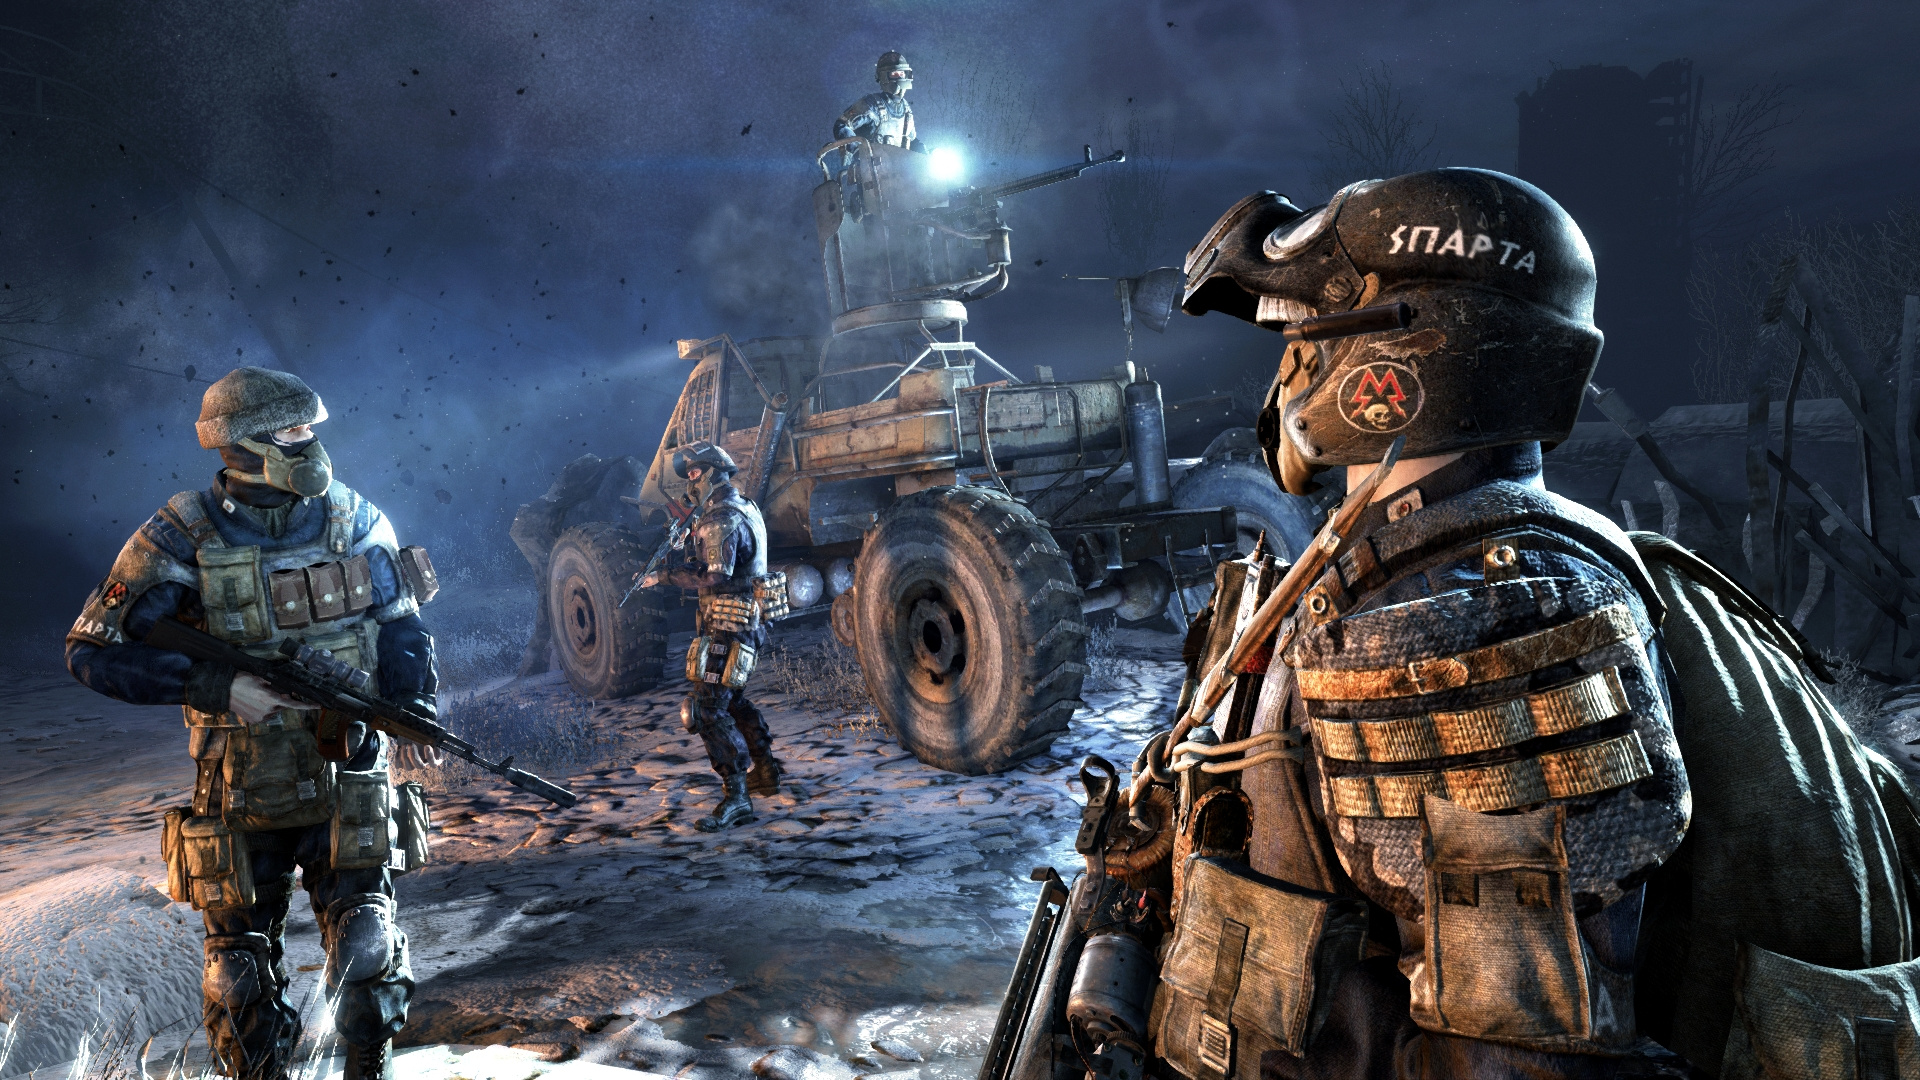 Metro Redux Ps4 Playstation 4 Game Profile News Reviews Videos And Screenshots